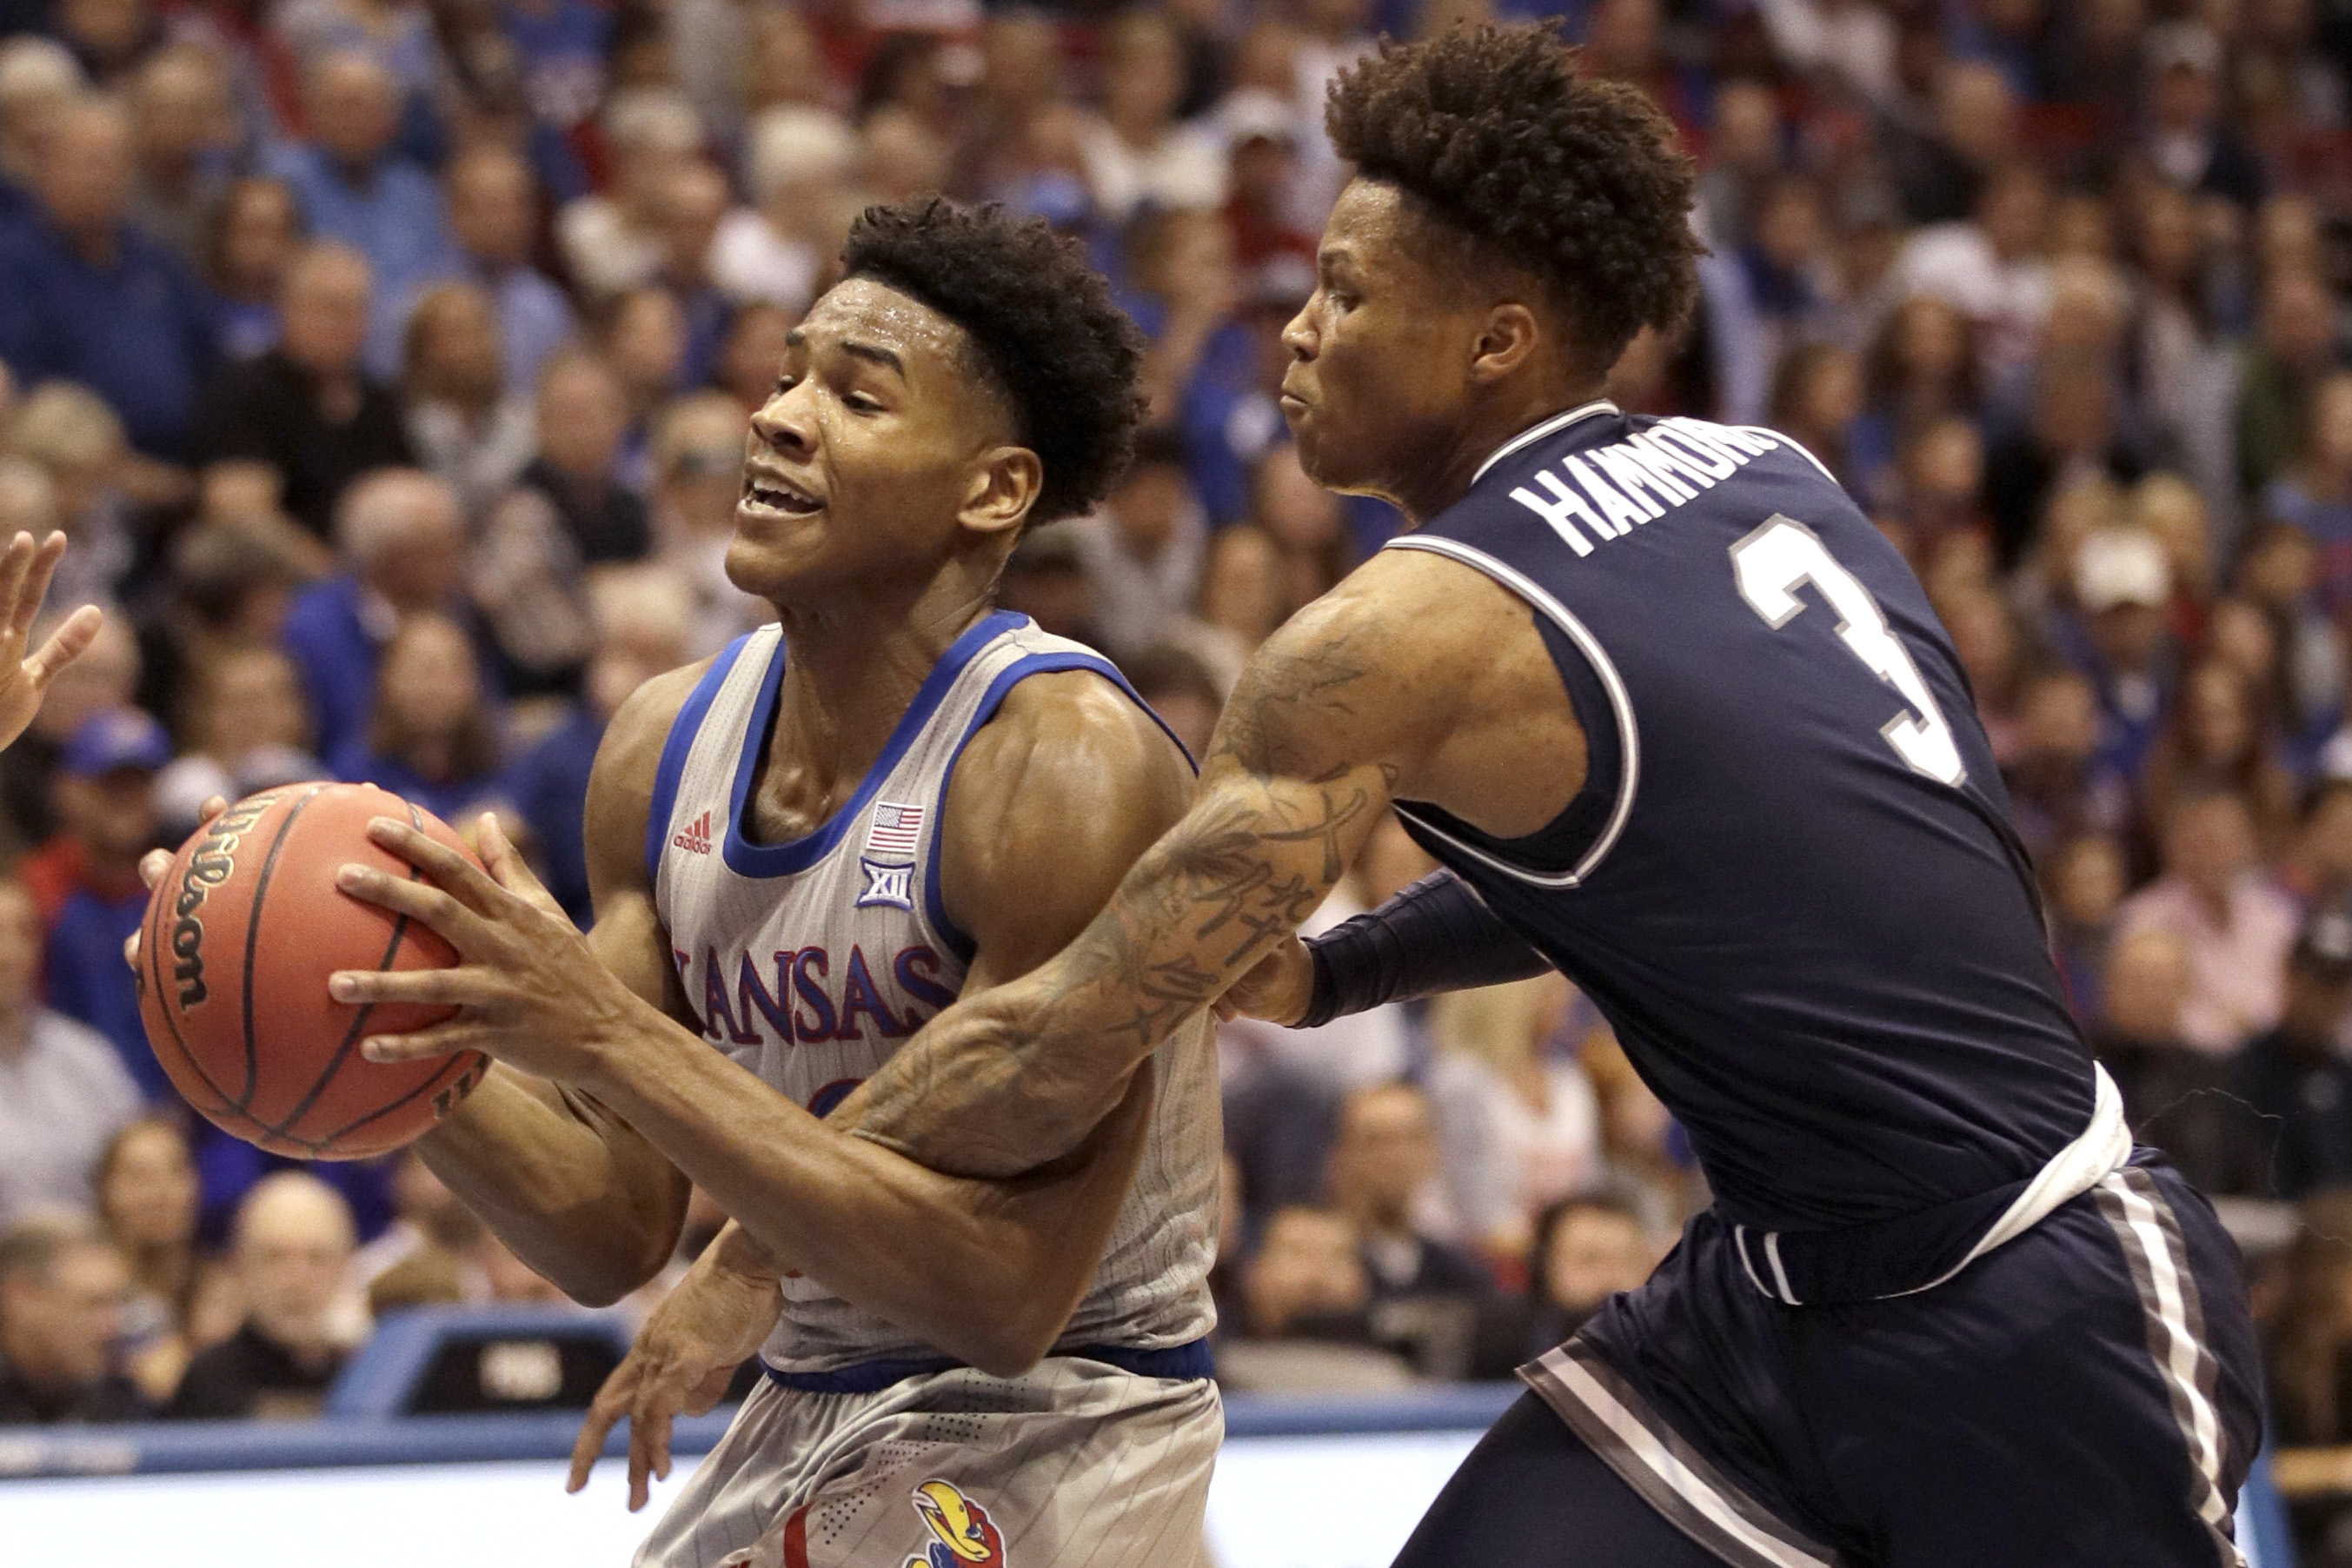 Moss leads No. 5 Kansas to 112-57 romp over Monmouth